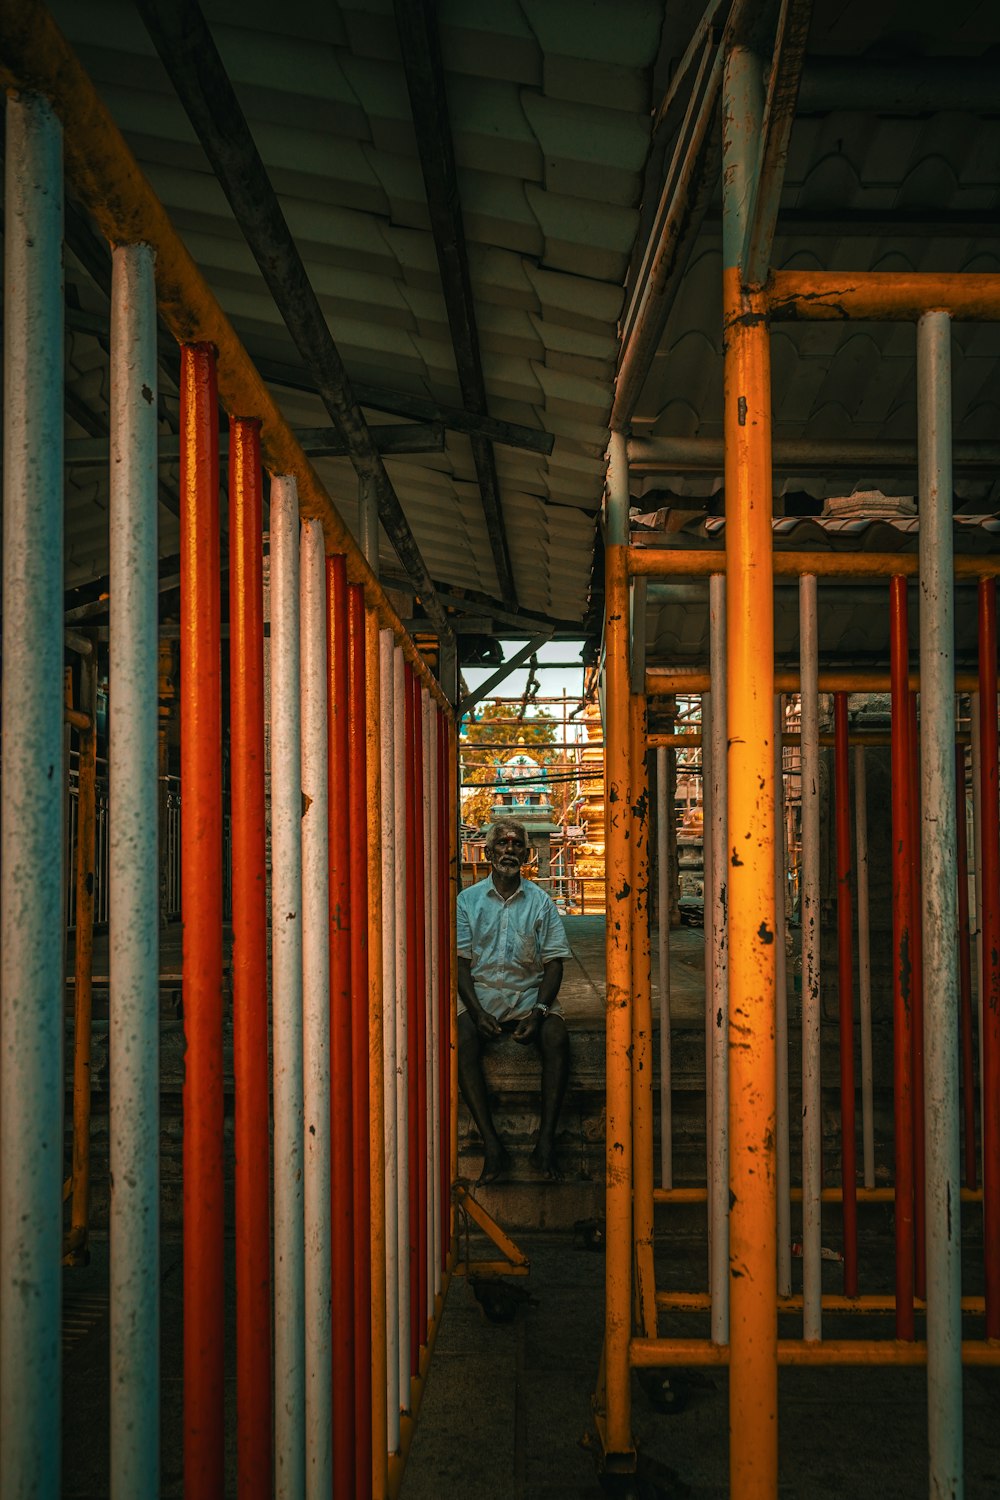 a man sitting in a room filled with orange and white pipes